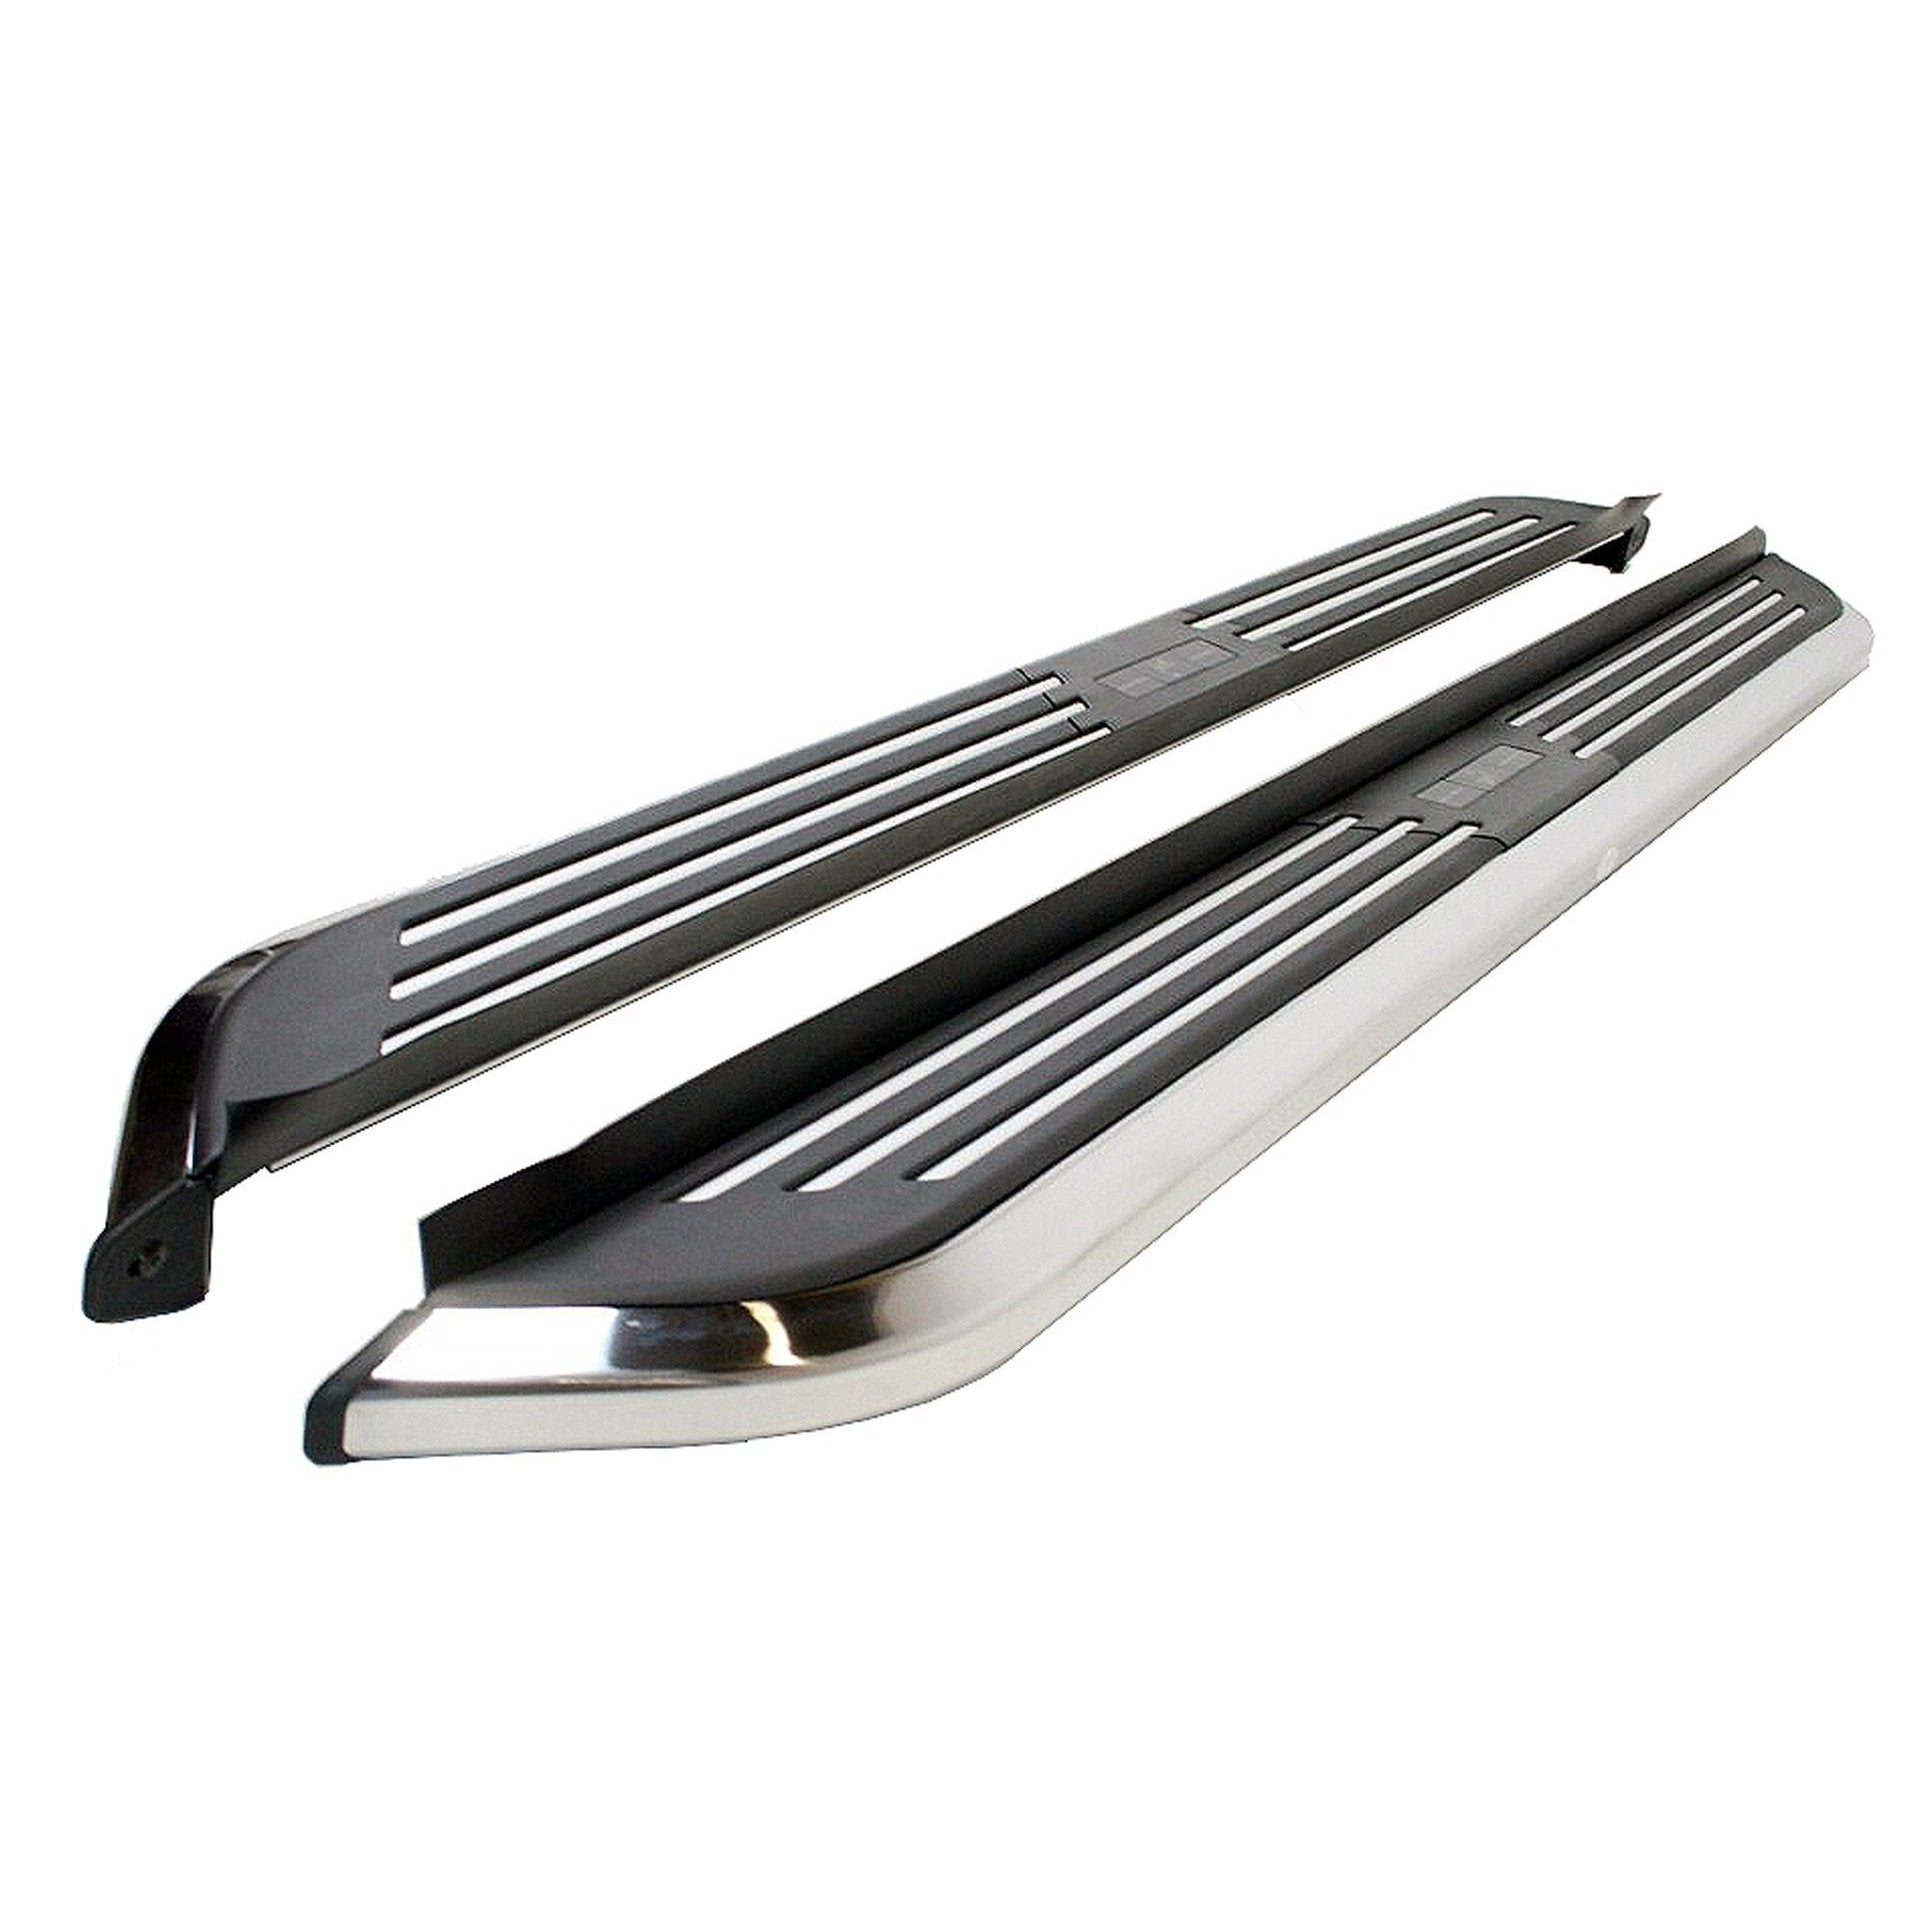 Premier Side Steps Running Boards for Range Rover Sport 2005-2013 (L320) -  - sold by Direct4x4